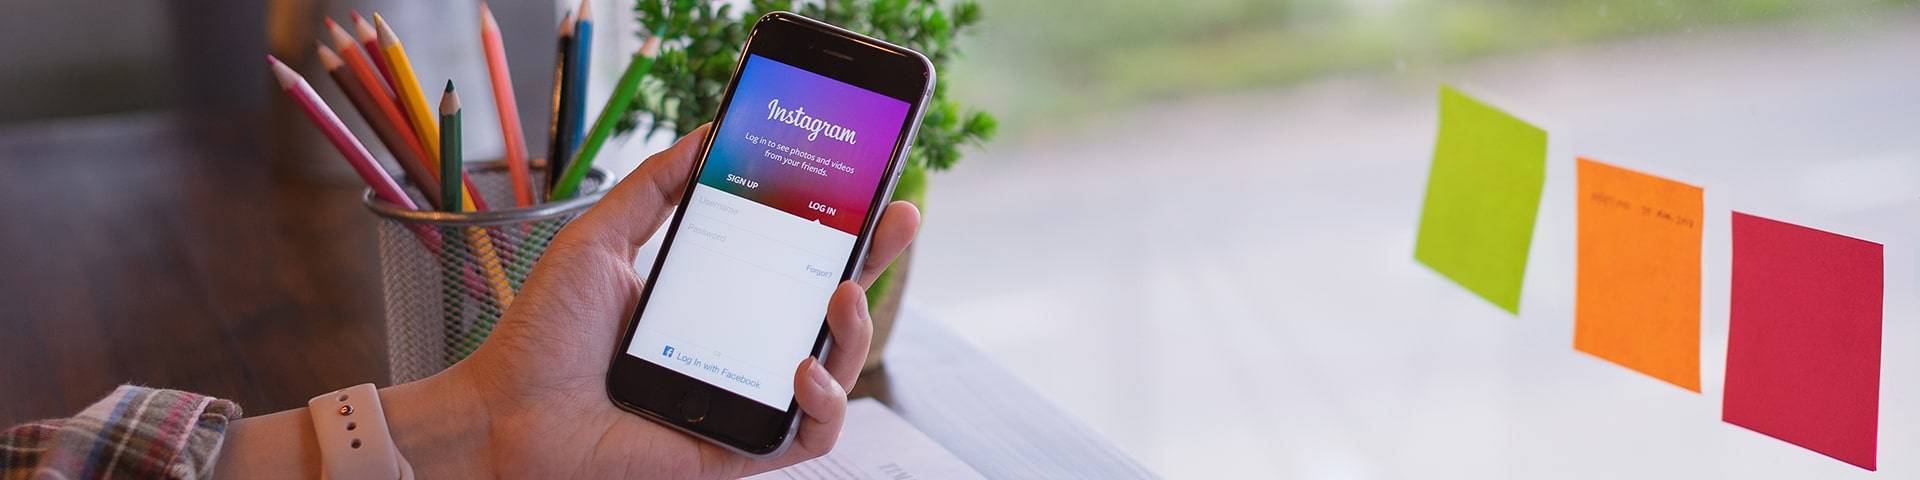 How to Reactivate Instagram: Five Useful Quick Steps